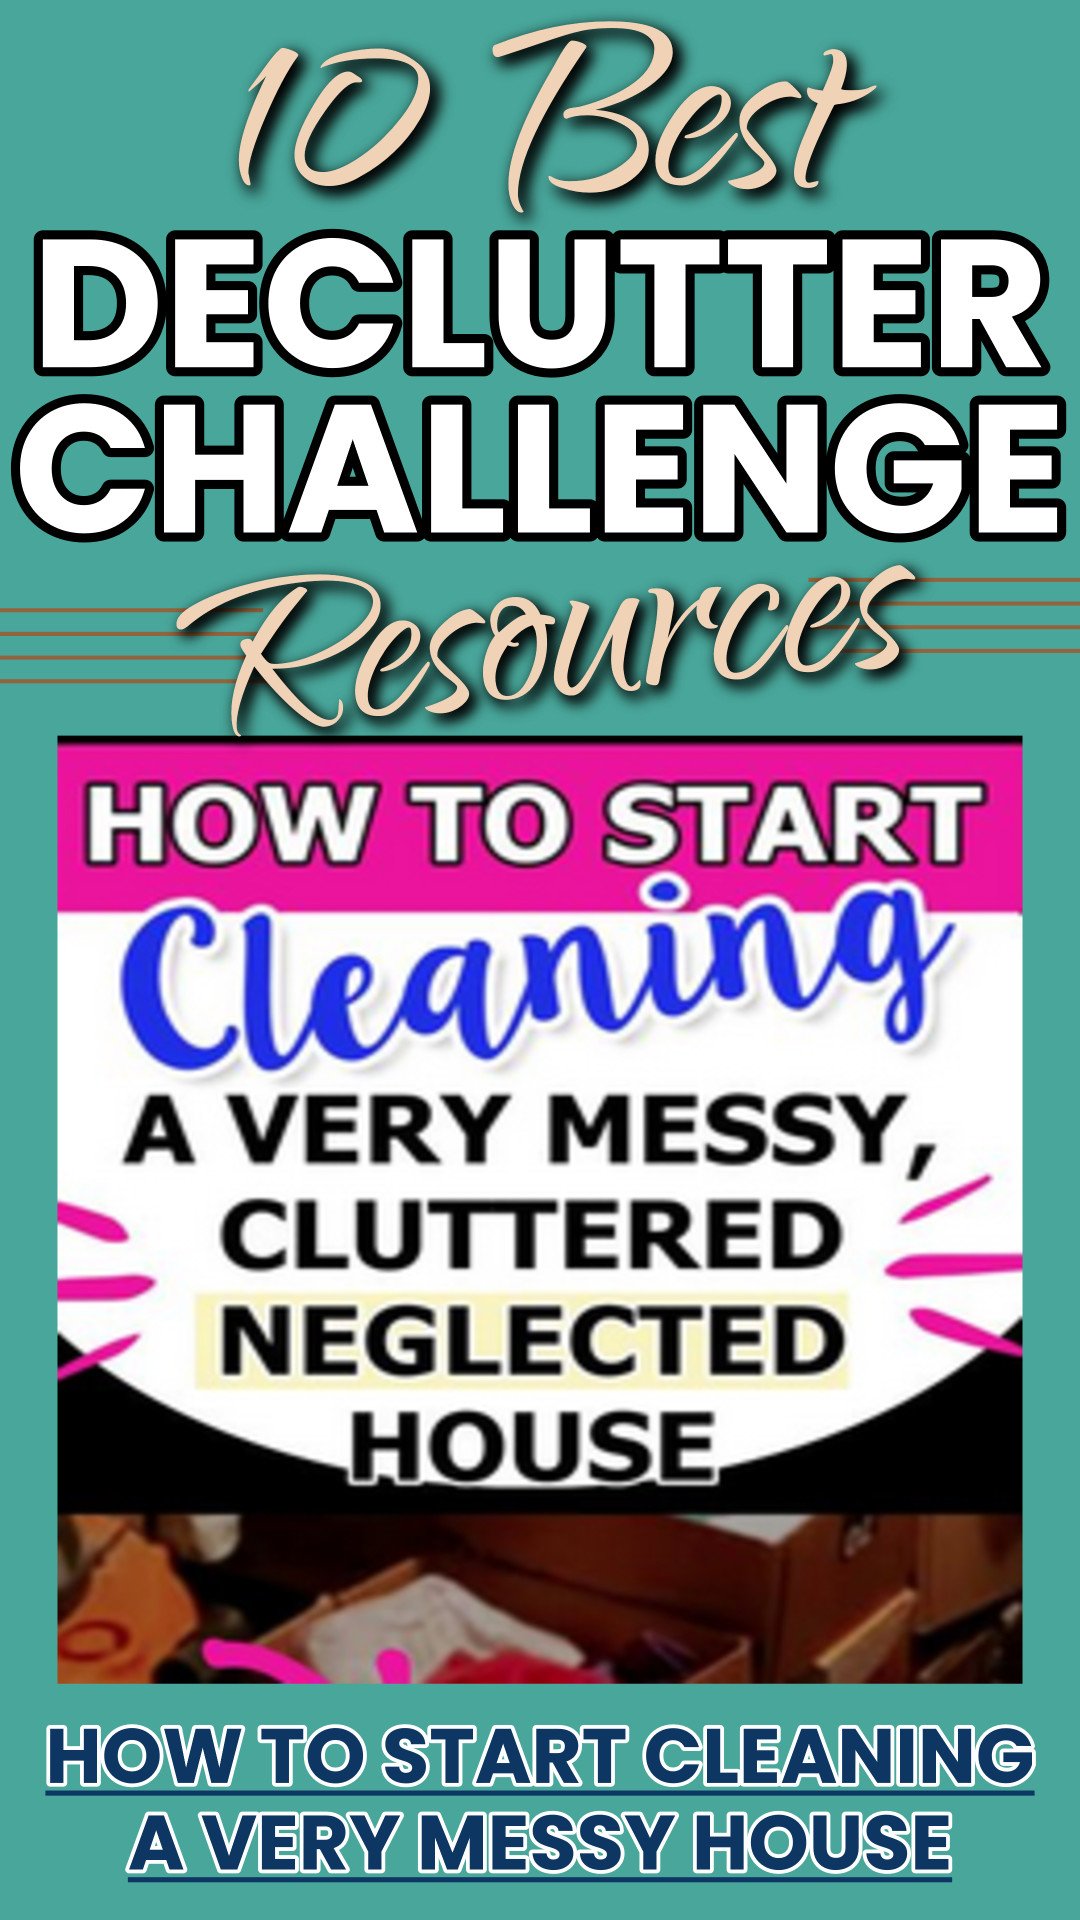 How To Start Cleaning a VERY Messy House